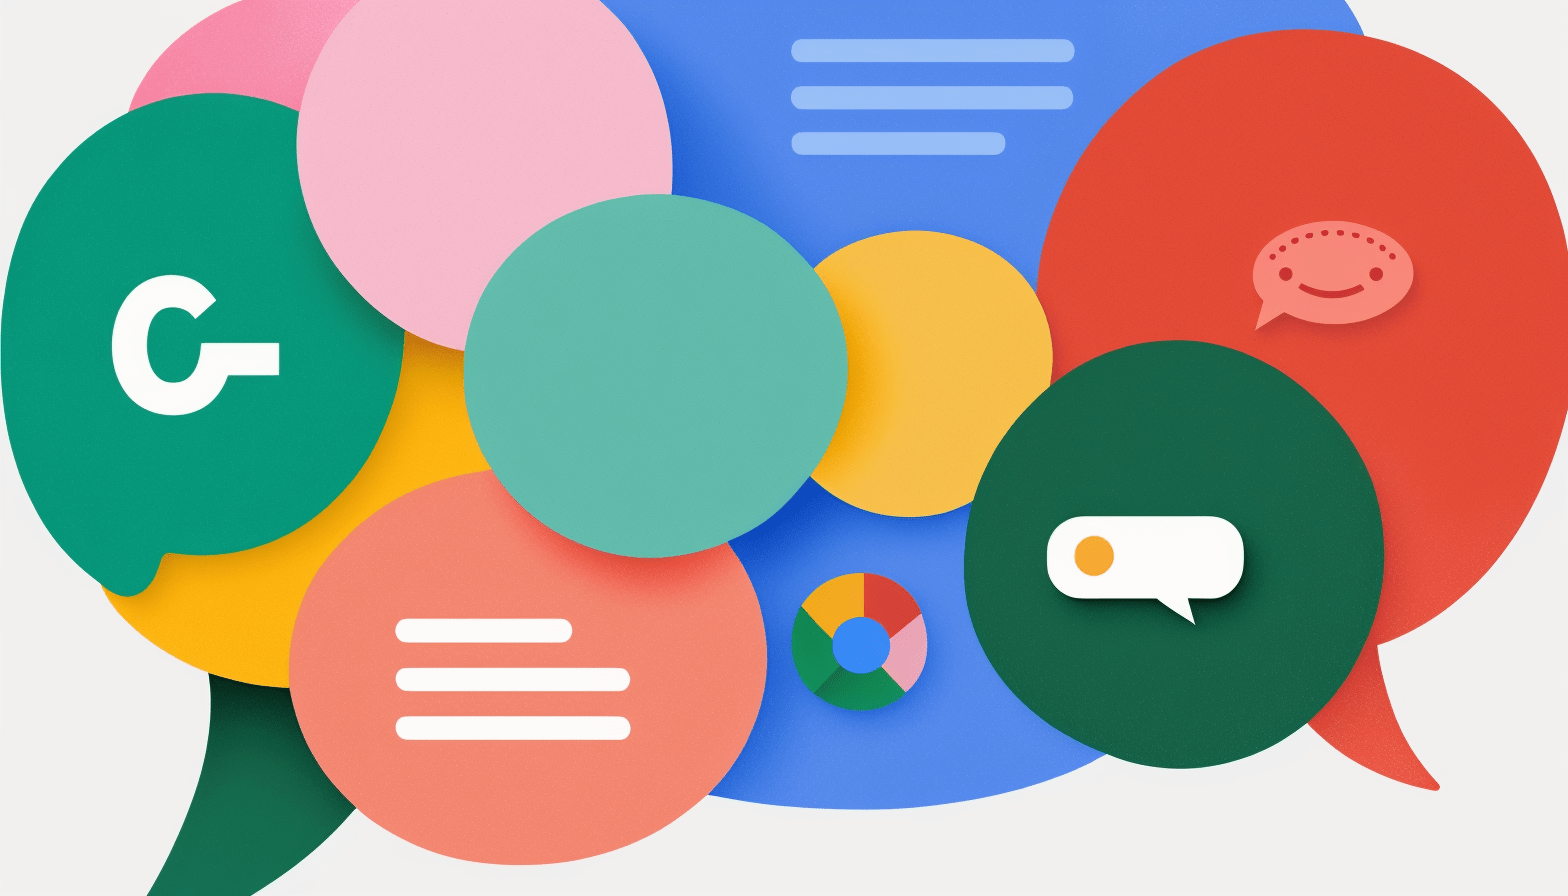 Google’s chat AI Bard not to replace search